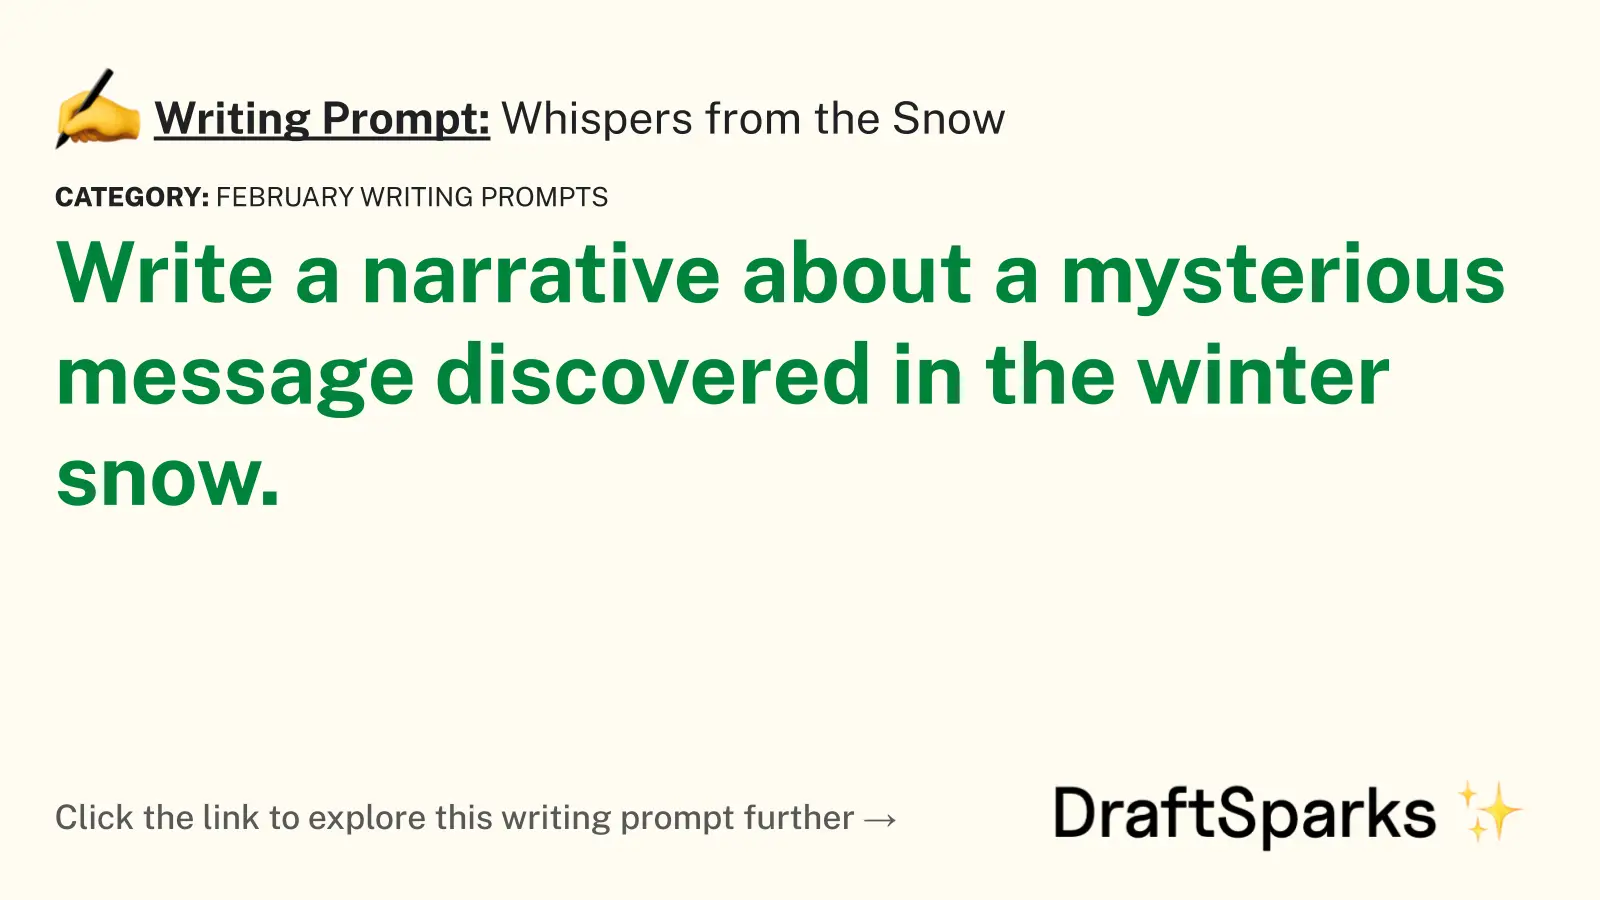 Whispers from the Snow